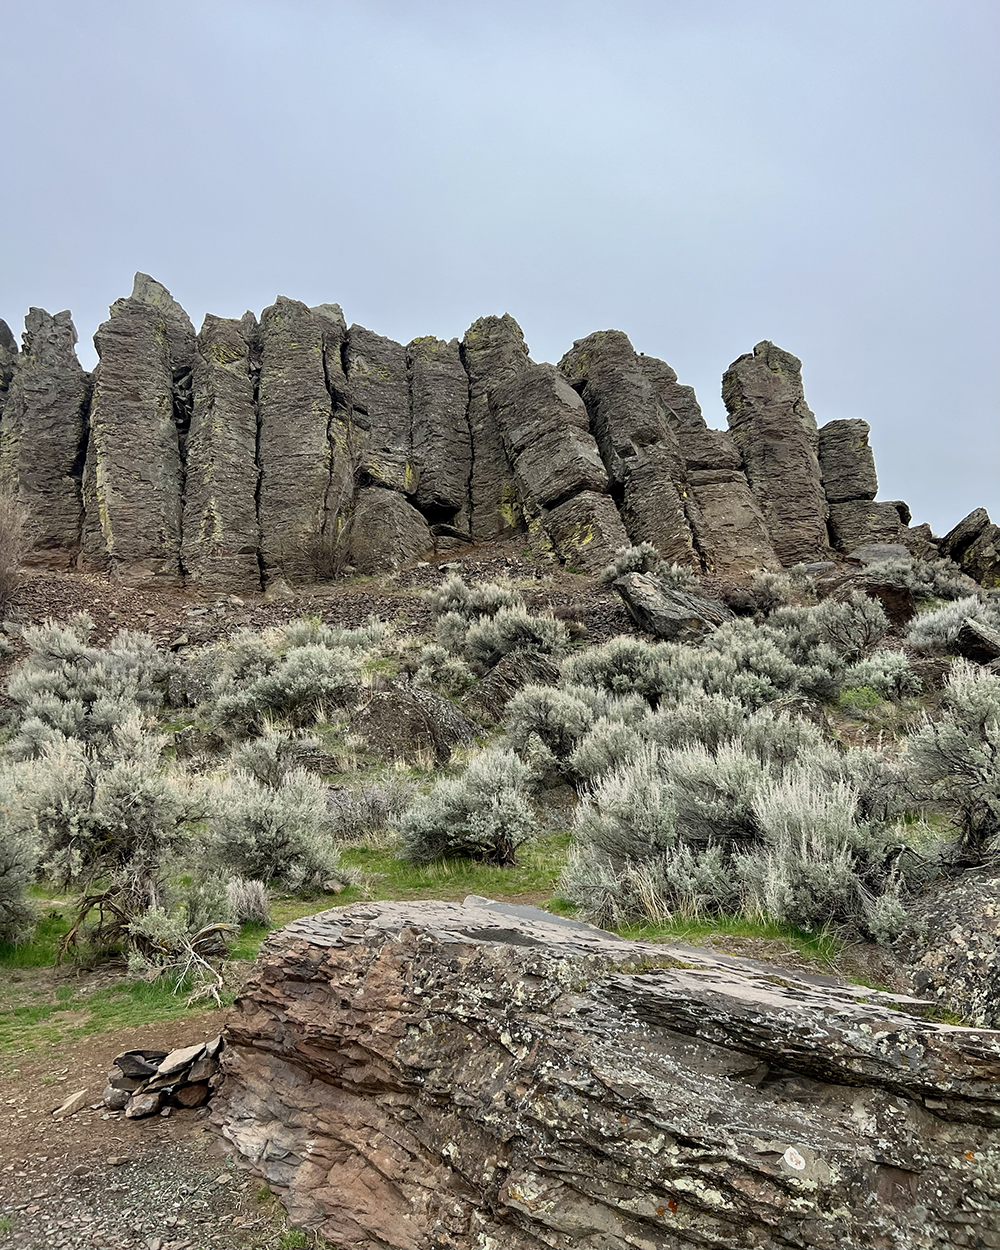  The leaning basalt columns of Feathers. 